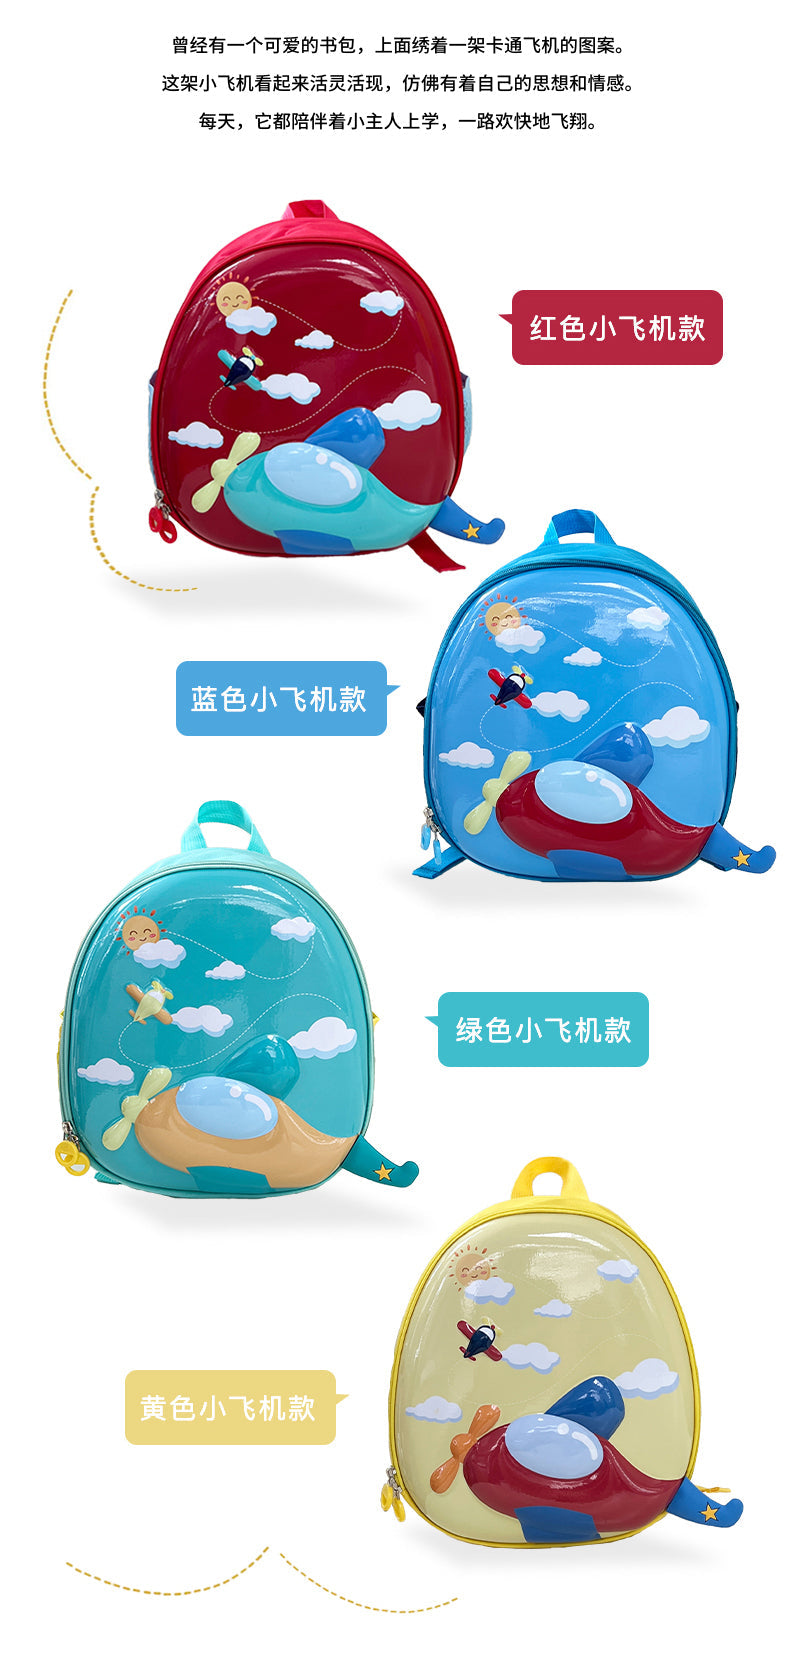 CANDY HOUSE HARD CASE BACKPACK